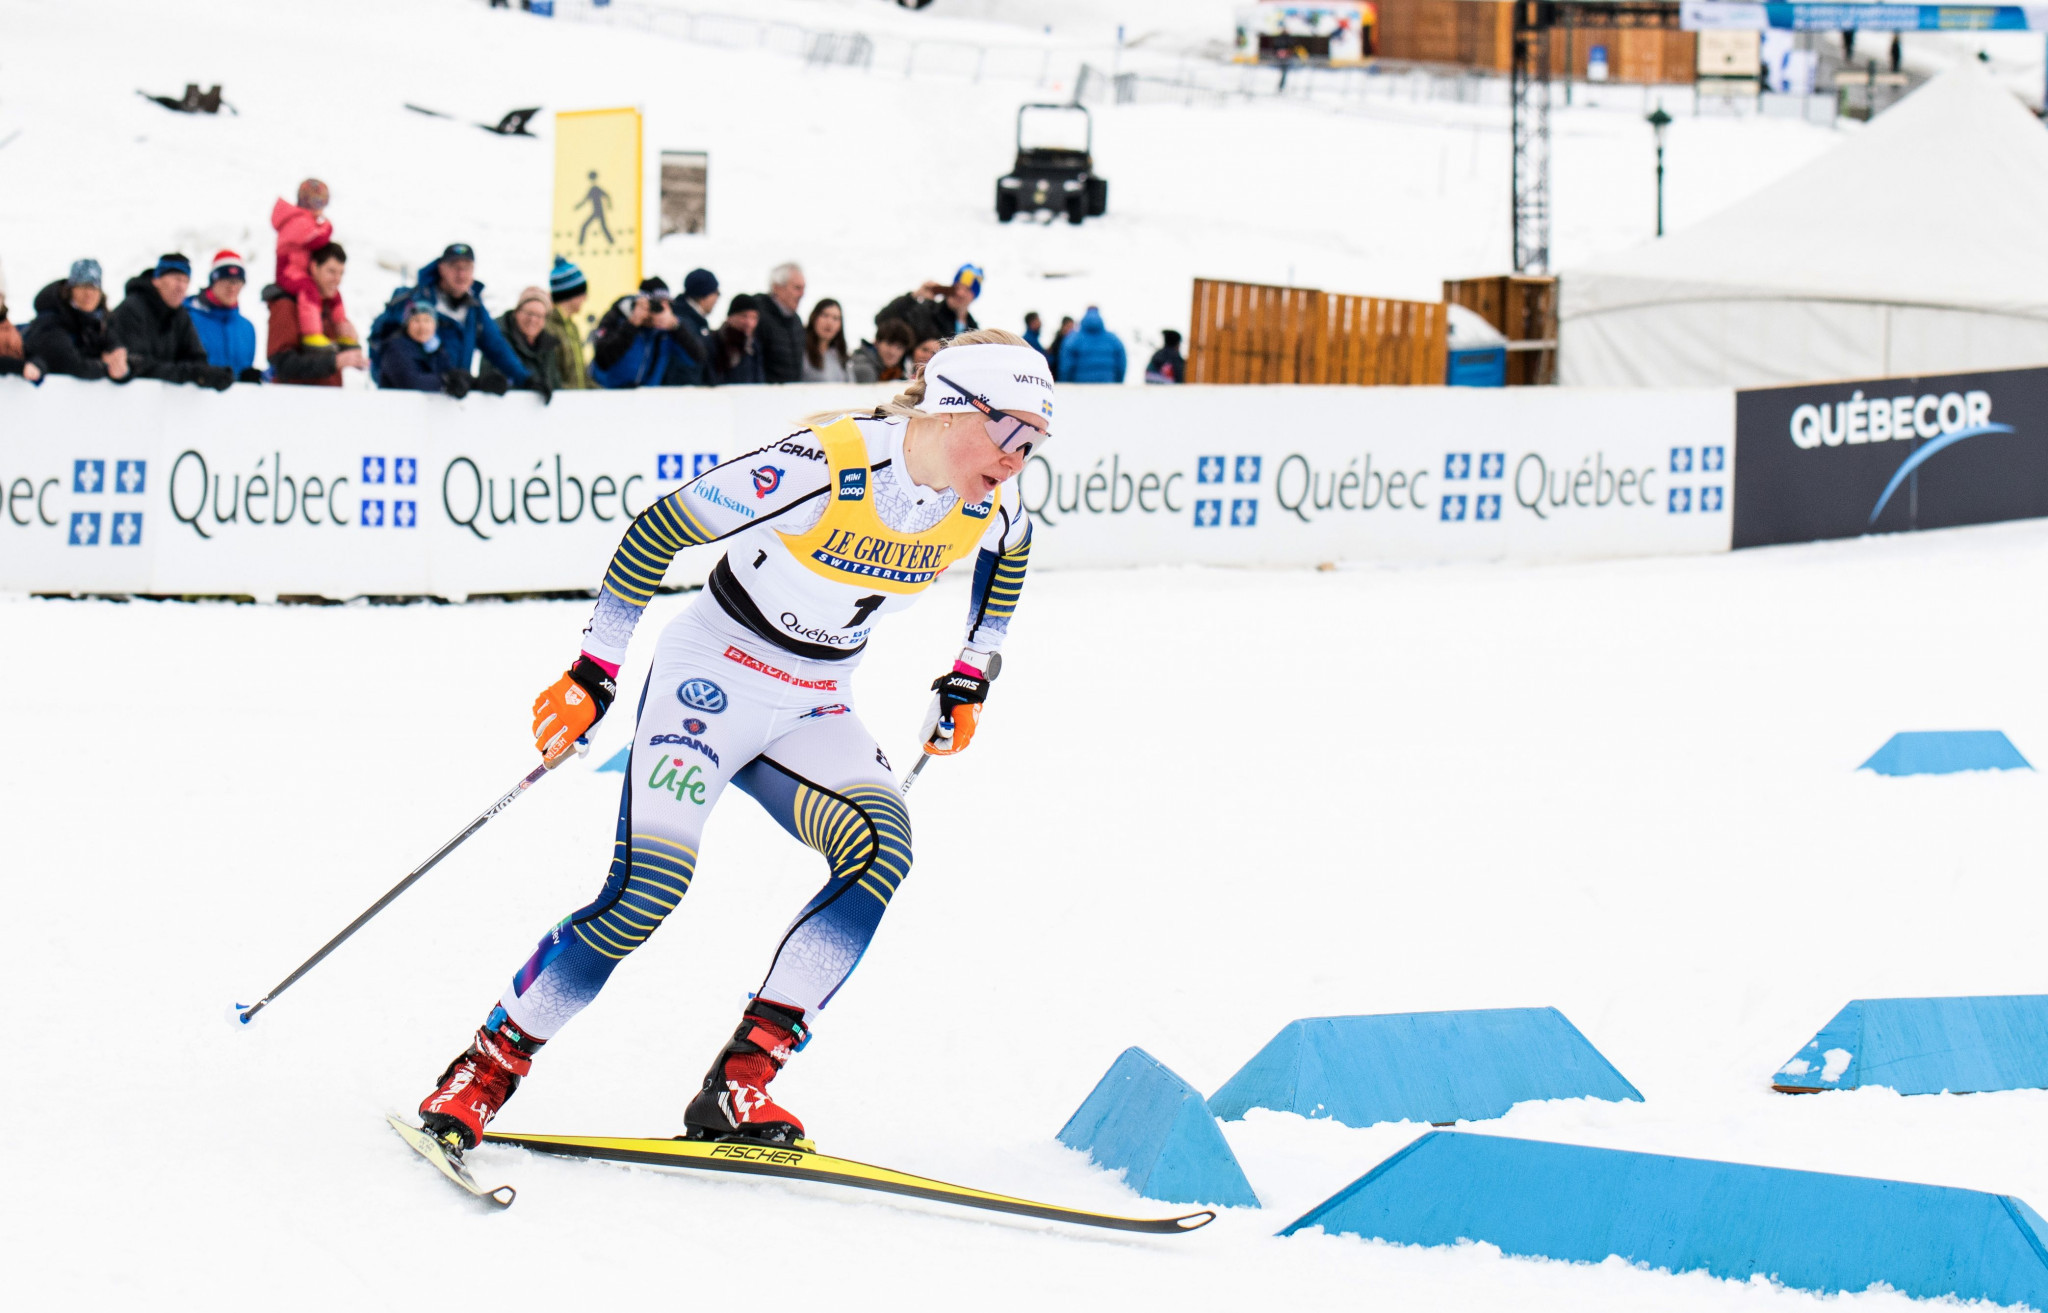 Twenty-two cross-country skiers have been selected by the Swedish Ski Association for the 2020-2021 season ©Getty Images